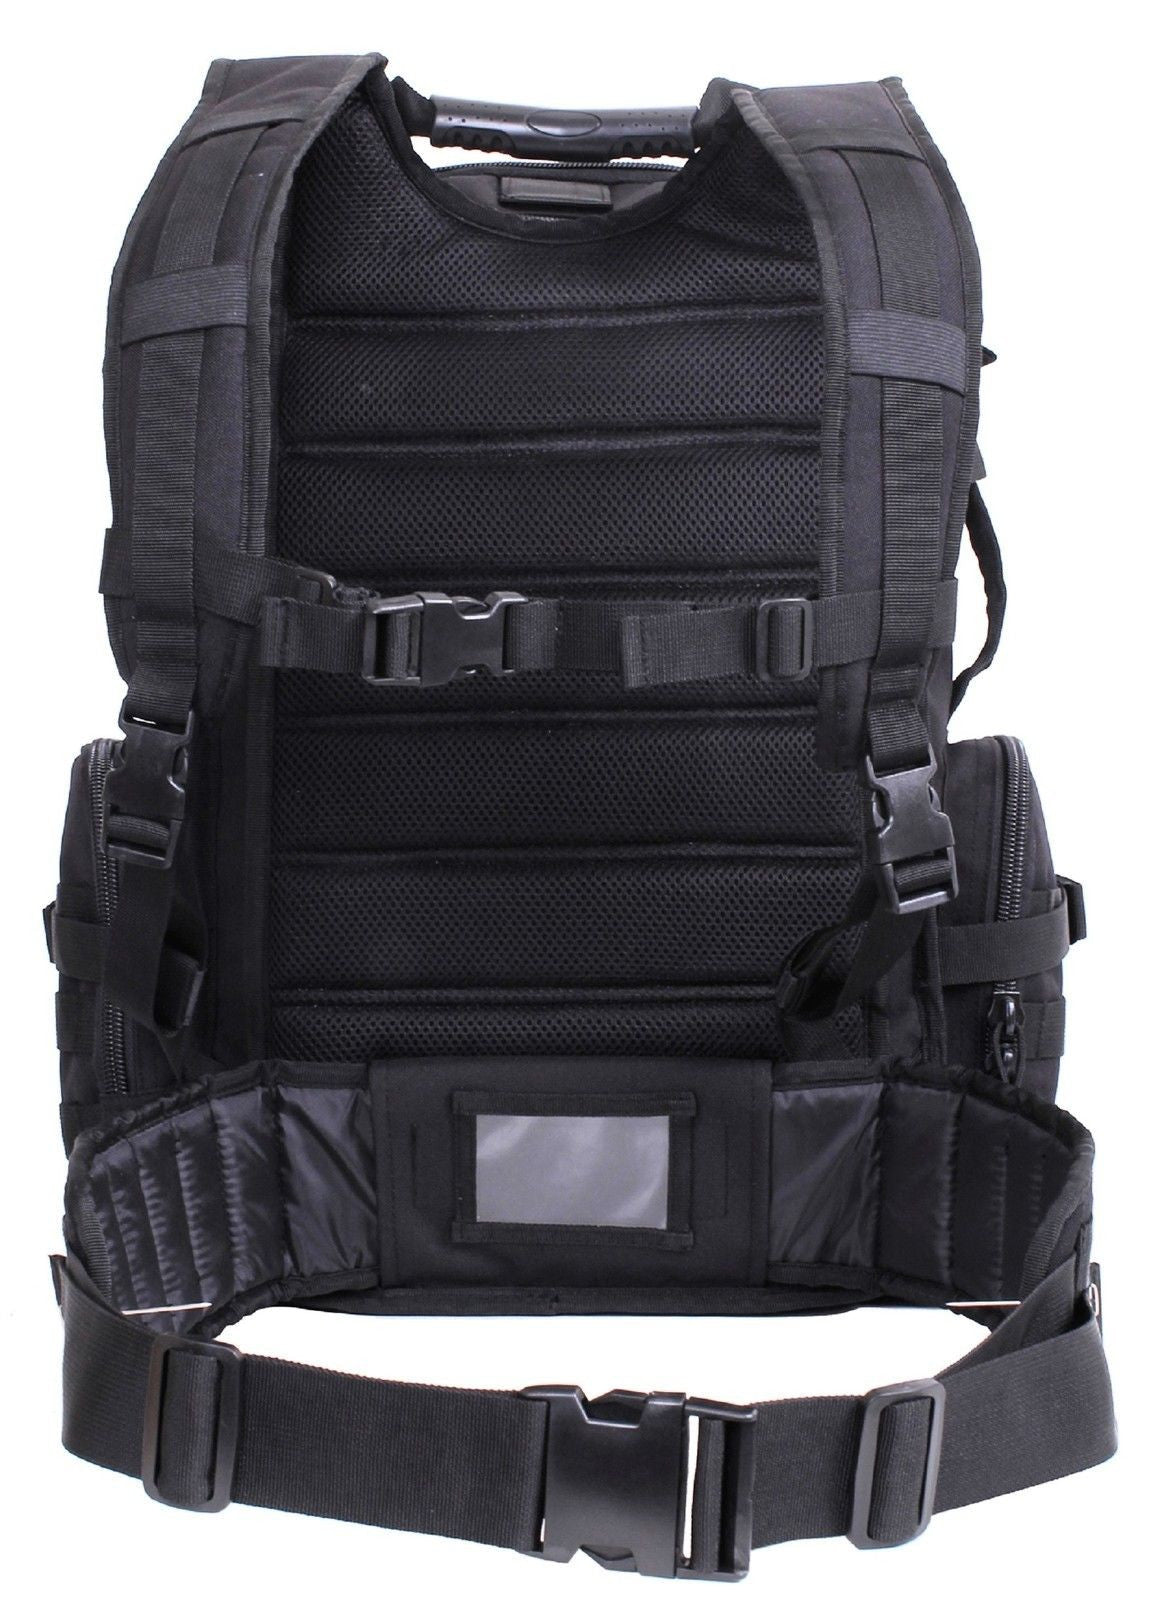 Multi-Chambered MOLLE Pack - Rothco 20" Tactical & Hiking Backpack Bag